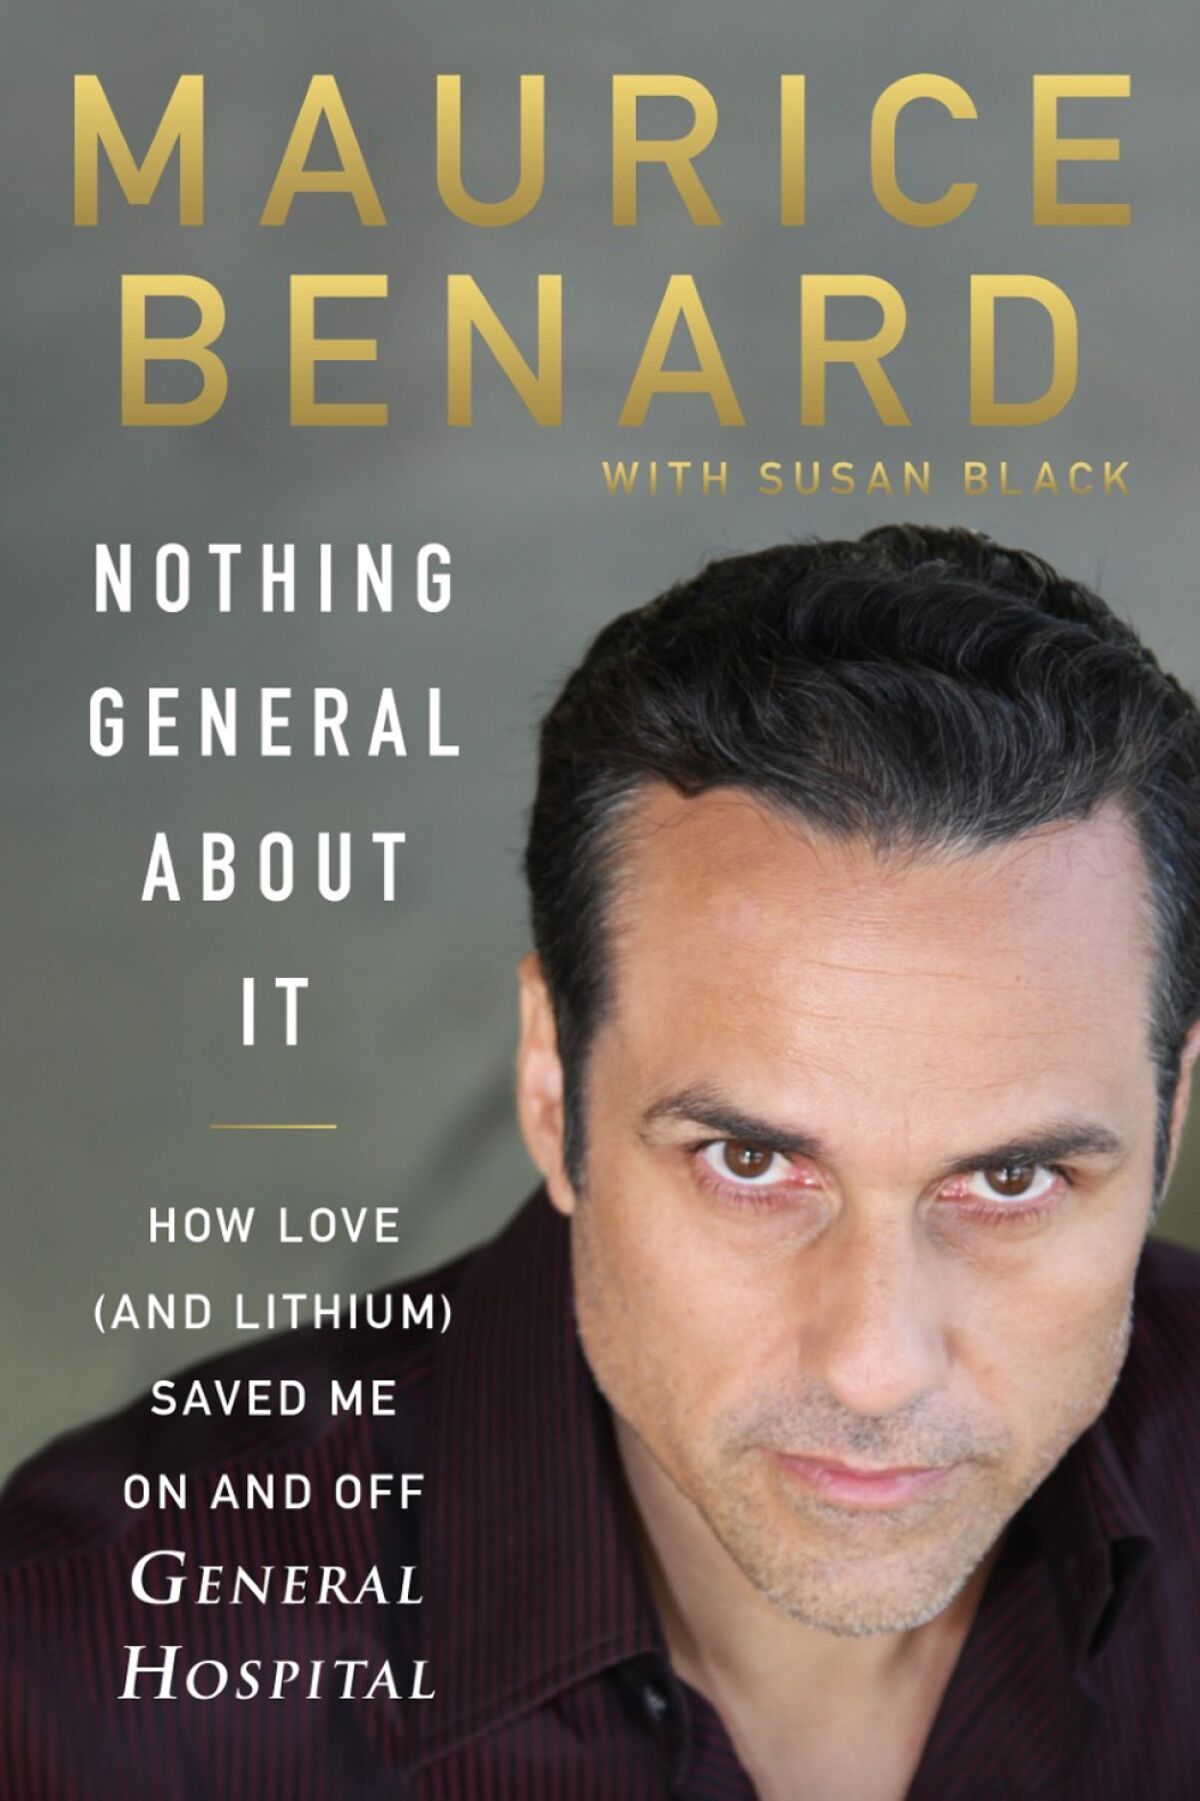 Maurice Benard, author of "Nothing General About It"